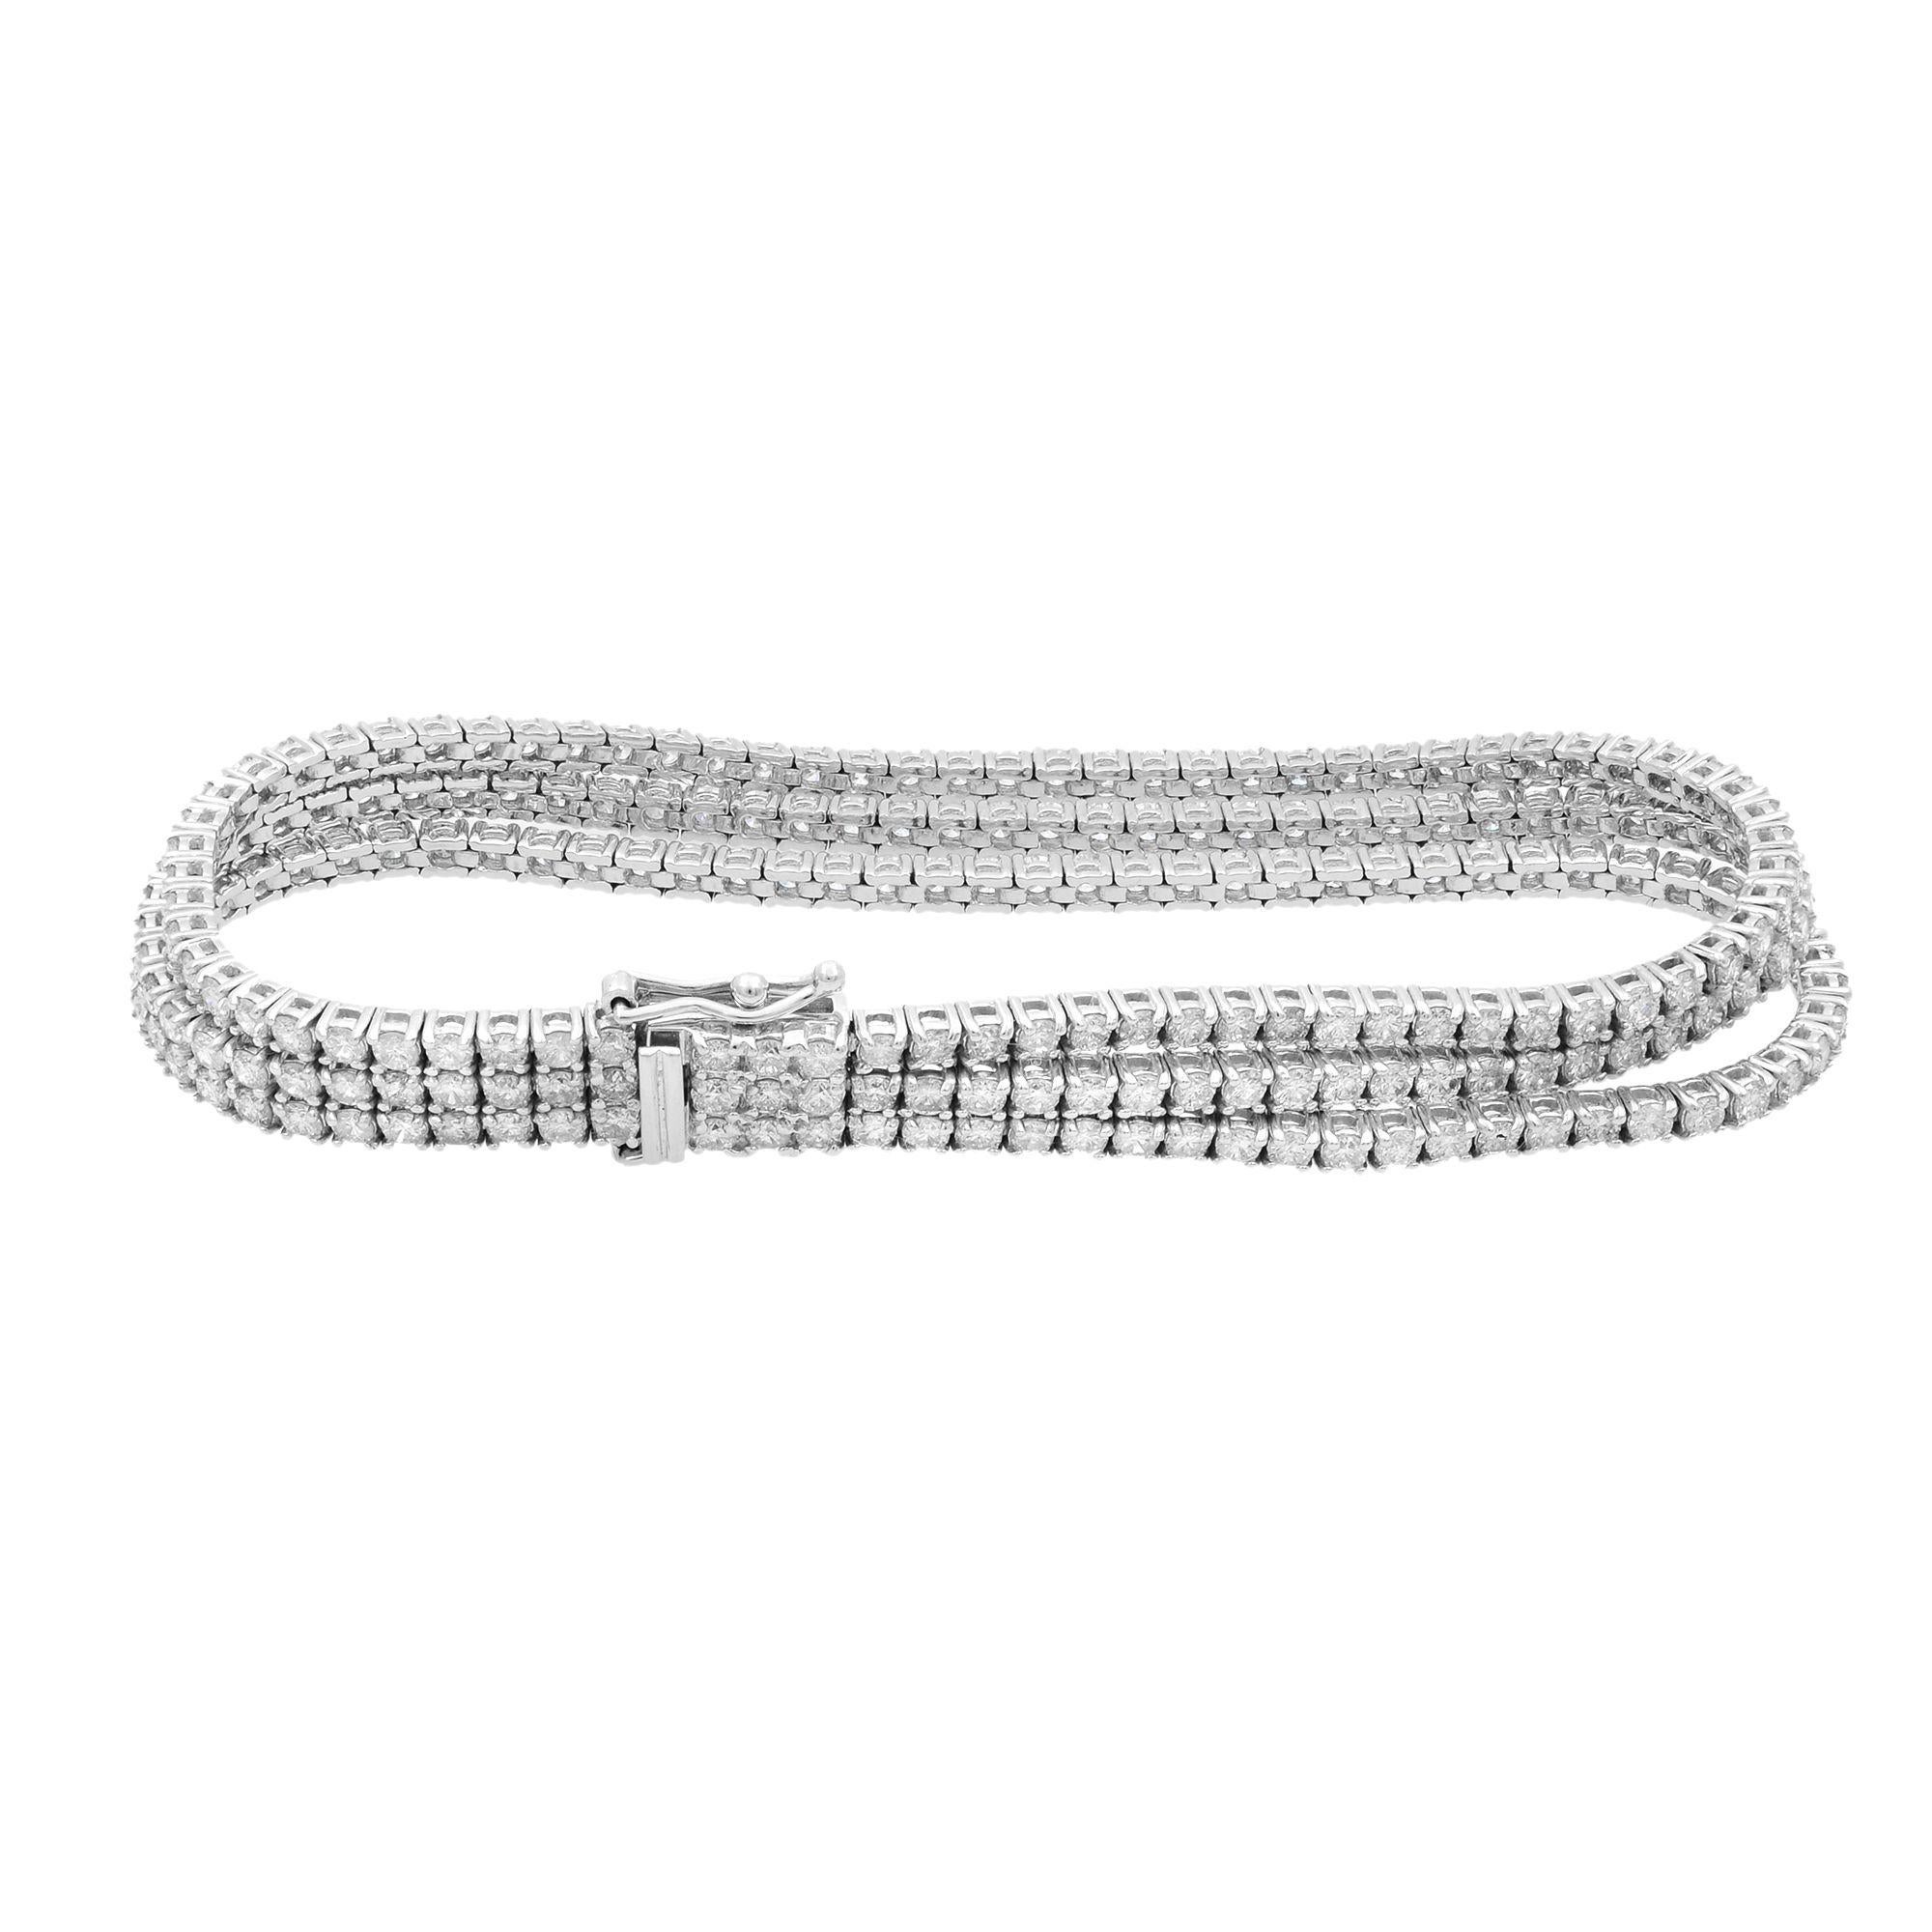 This gorgeous 3-row diamond tennis bracelet showcases 14.20 carats of sparkling prong set round cut diamonds. Each stone expertly set in a lustrous 14K white gold frame. Featuring a trendy 3-row, prong-set design and a flexible fit. Diamonds are G